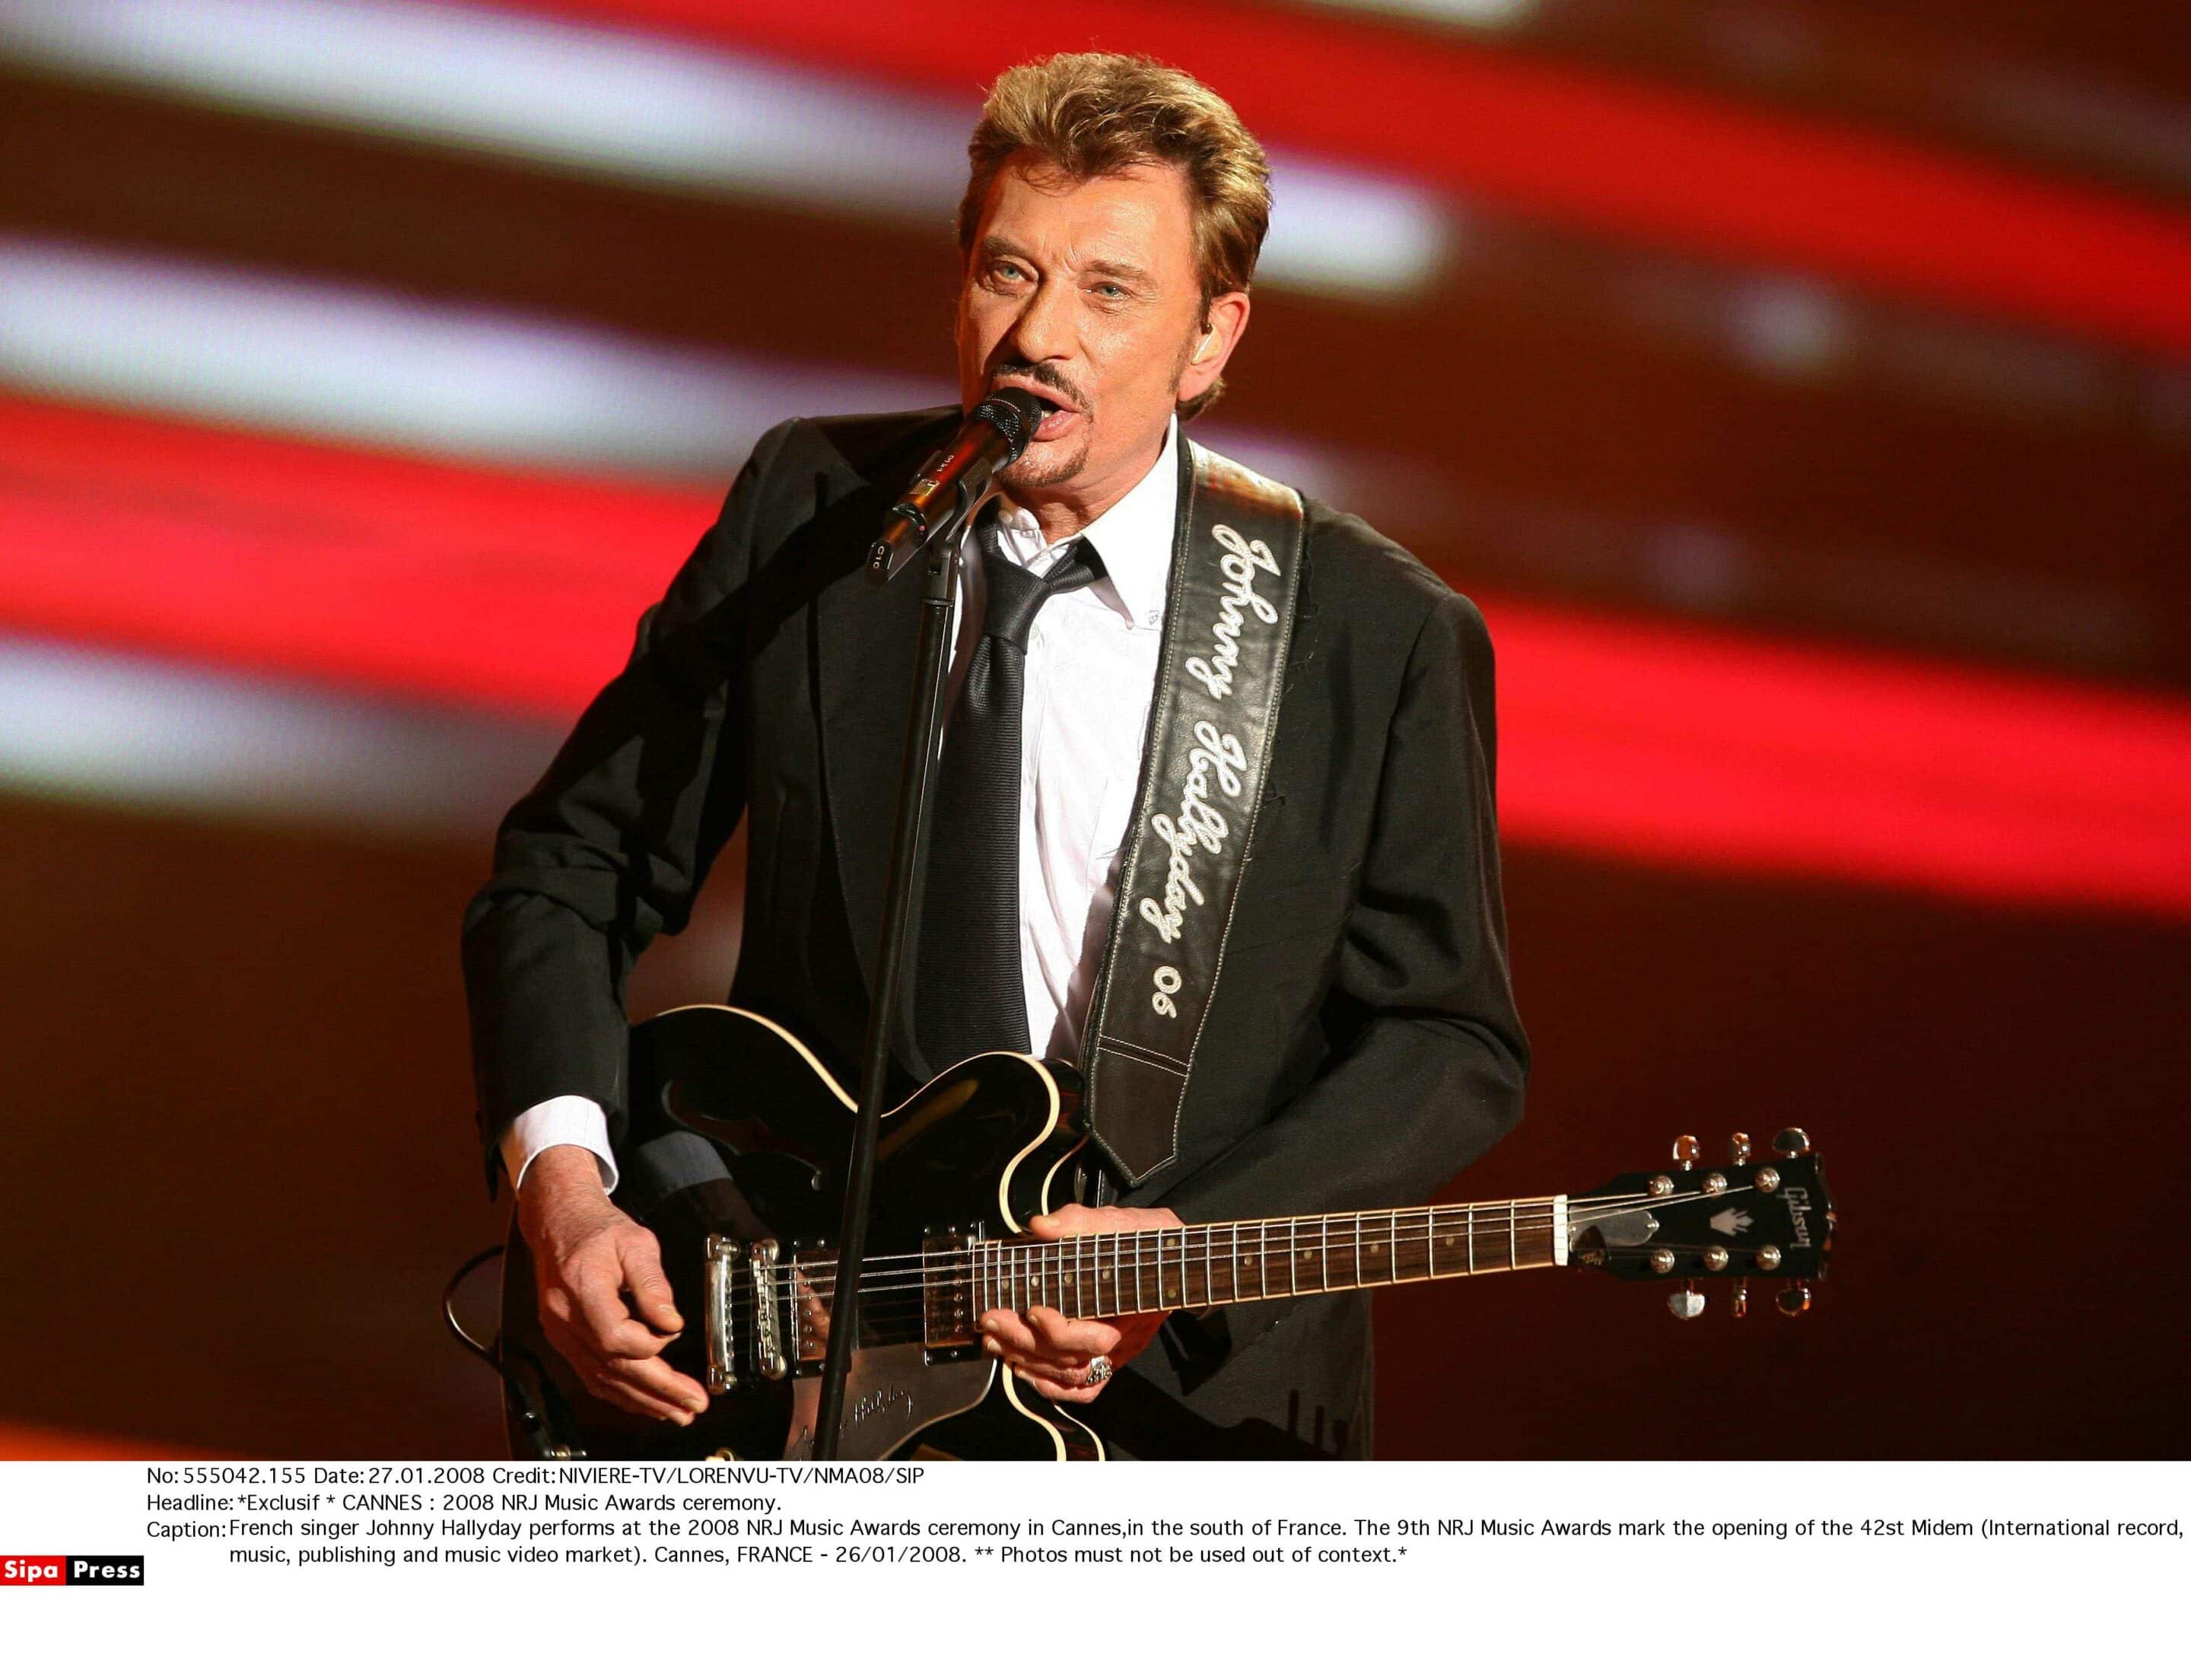 French singer Johnny Hallyday performs at the 2008 NRJ Music Awards ceremony       in Cannes, 26/01/2008.